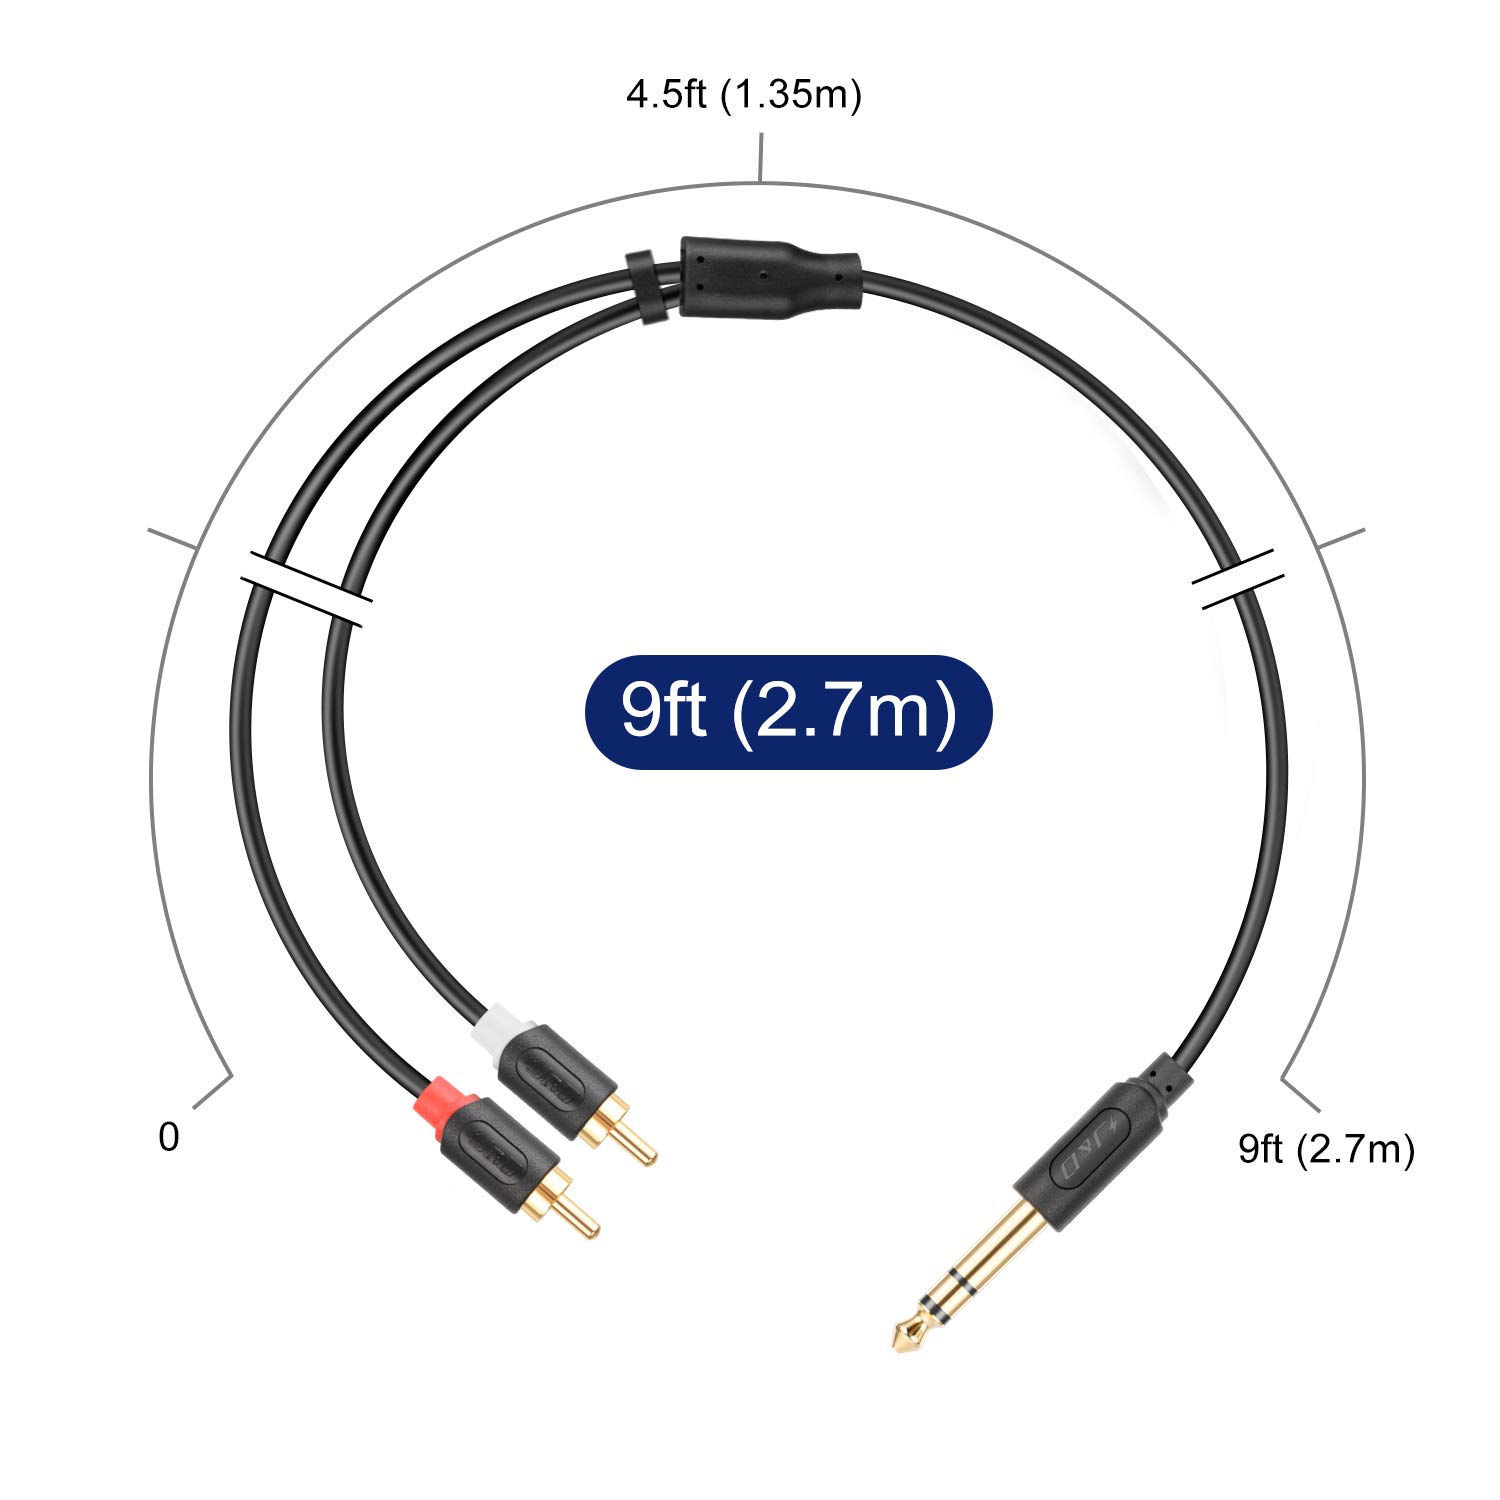 J&D Gold Plated 6.35mm 1/4 inch Male to 2 RCA Male Stereo Audio Adapter 1/4 to RCA Cable, 9 ft - image 5 of 8